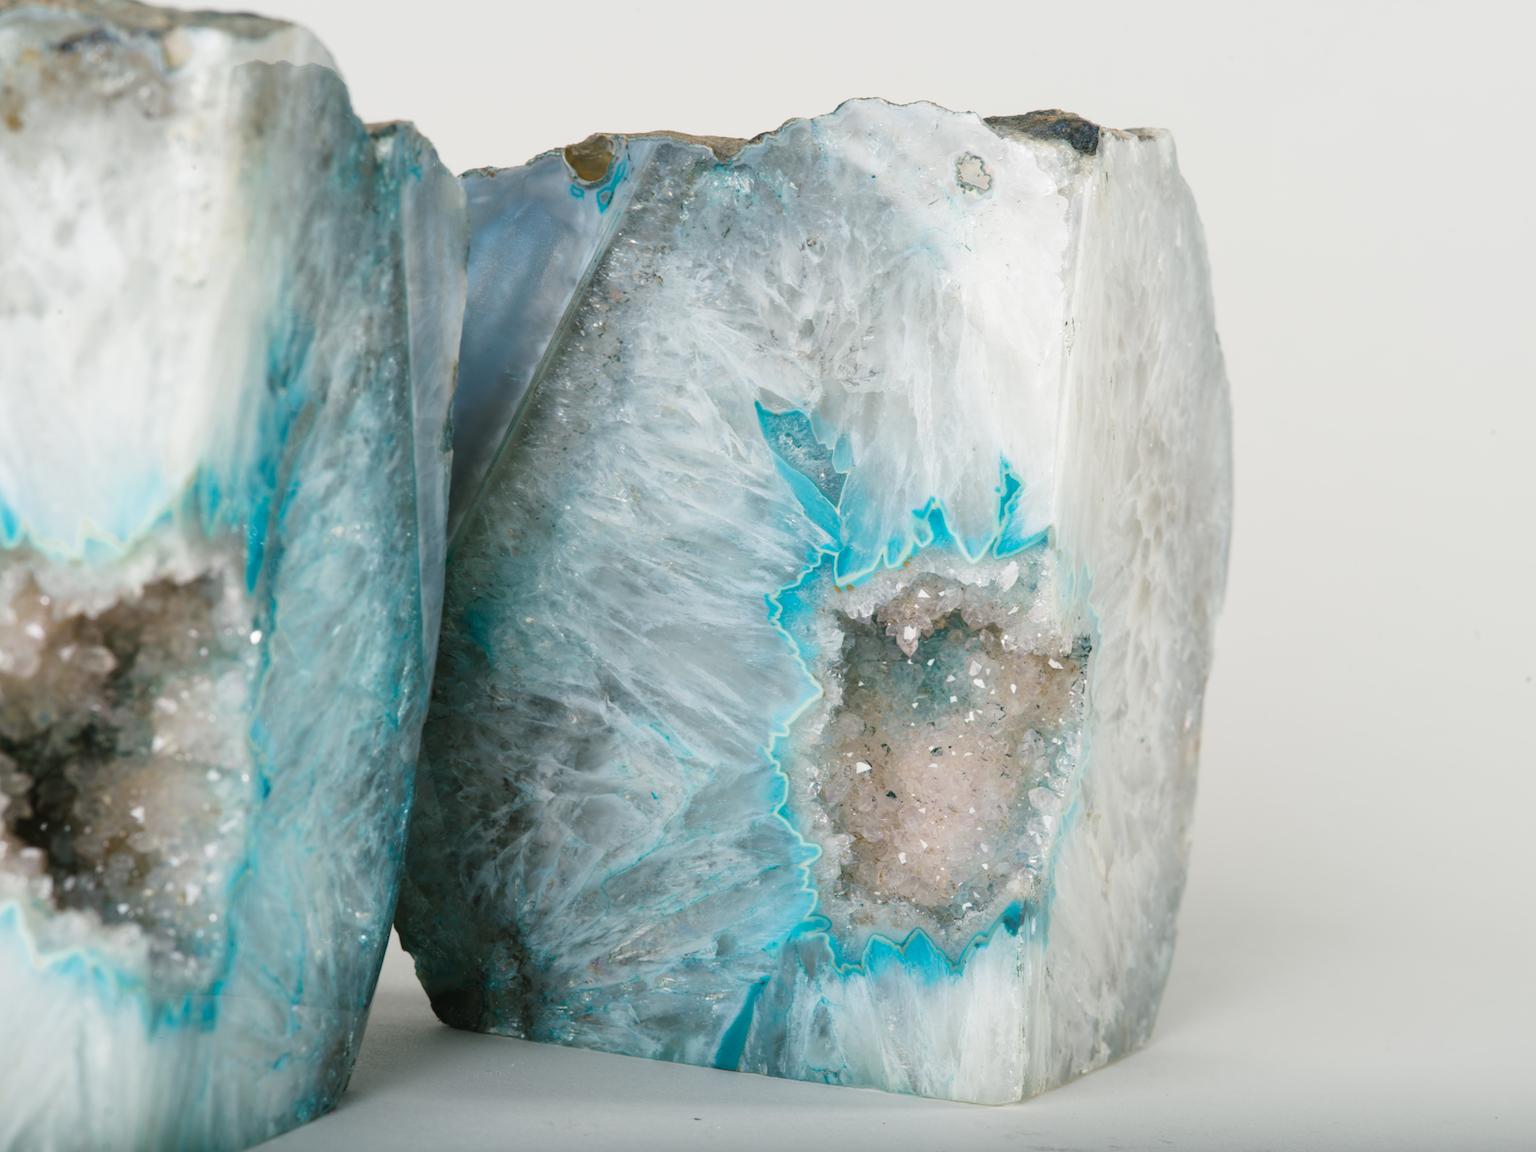 Brazilian Pair of Crystal Geode Bookends with Hues of Turquoise